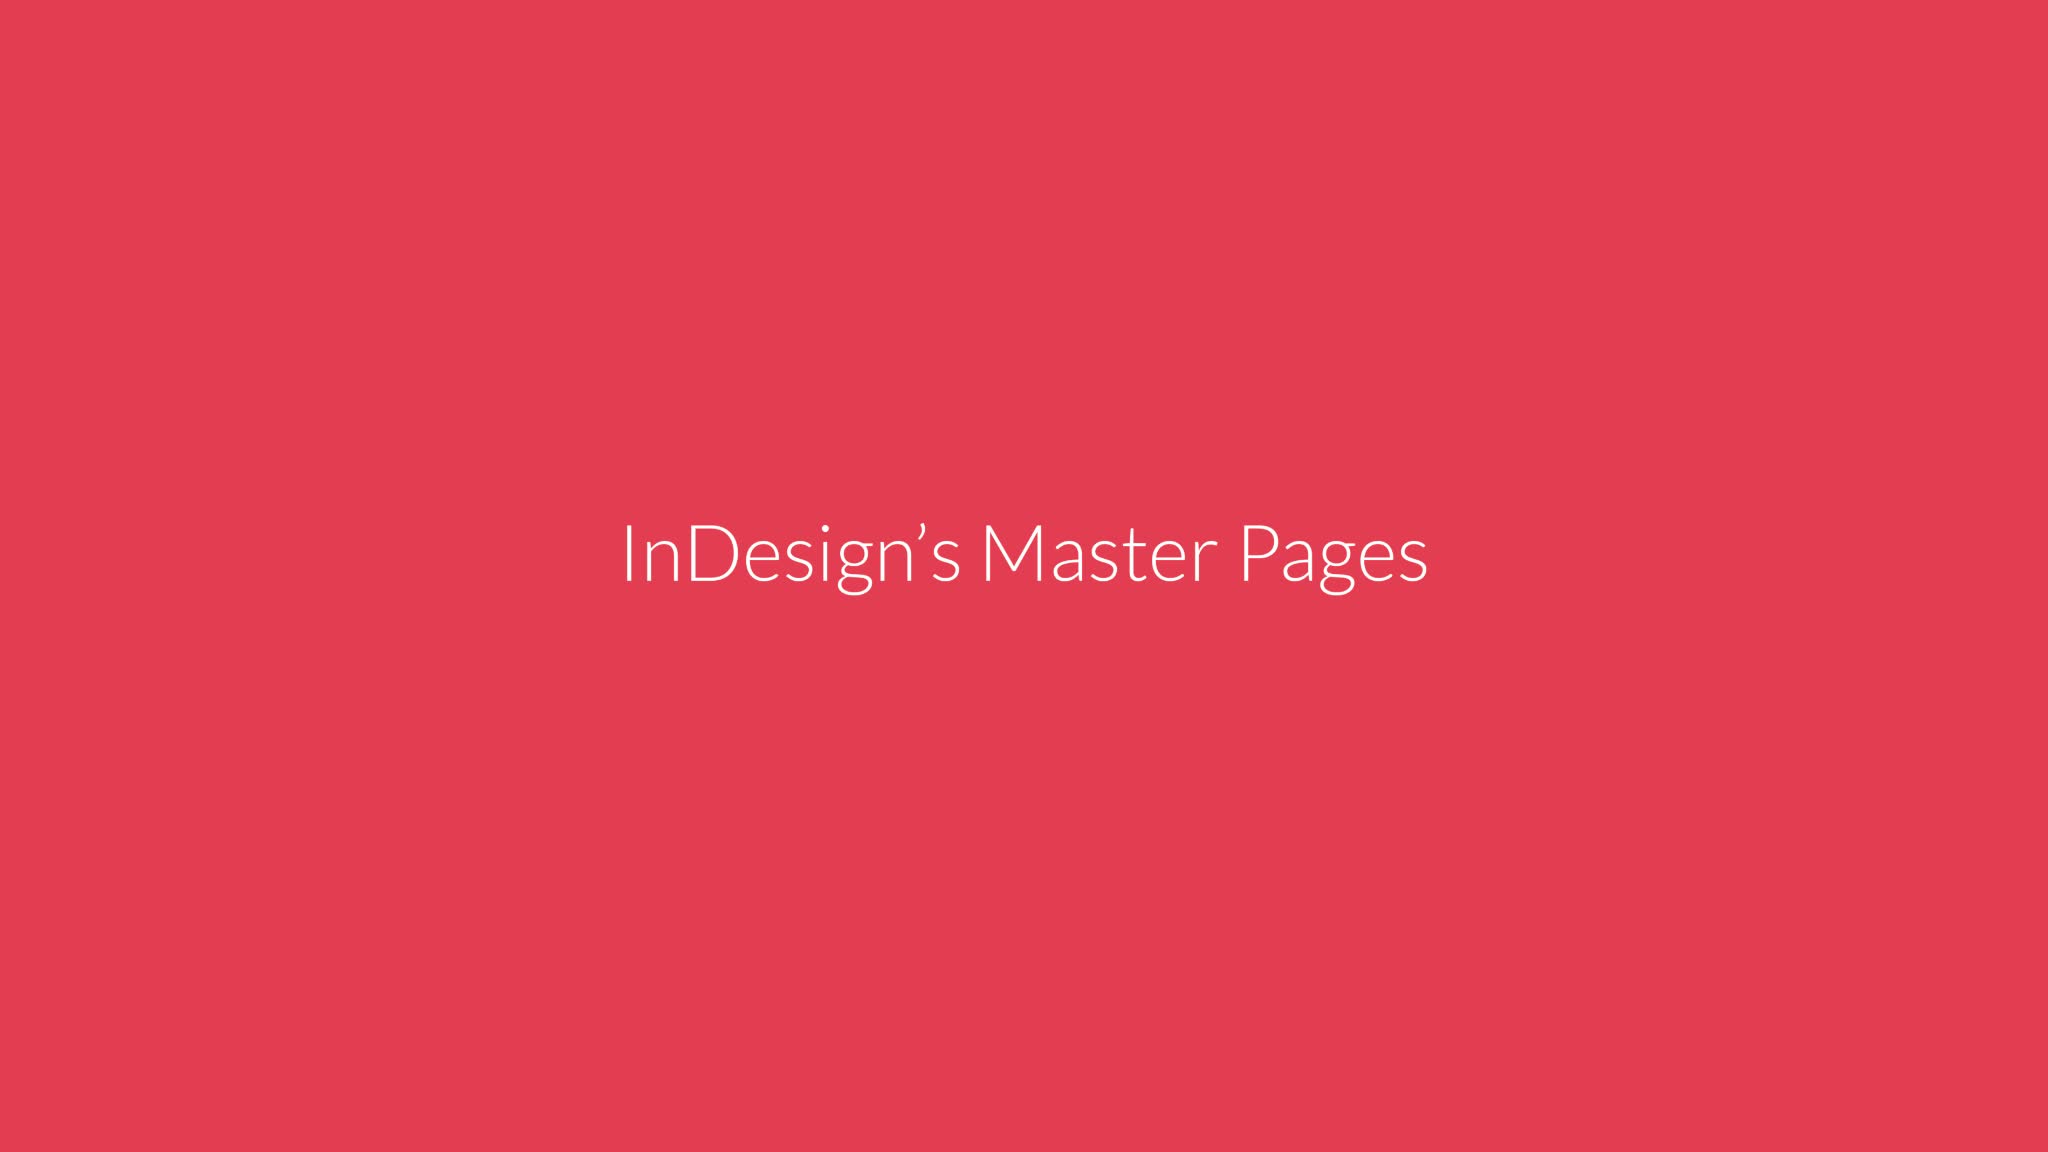 InDesign's Master Pages